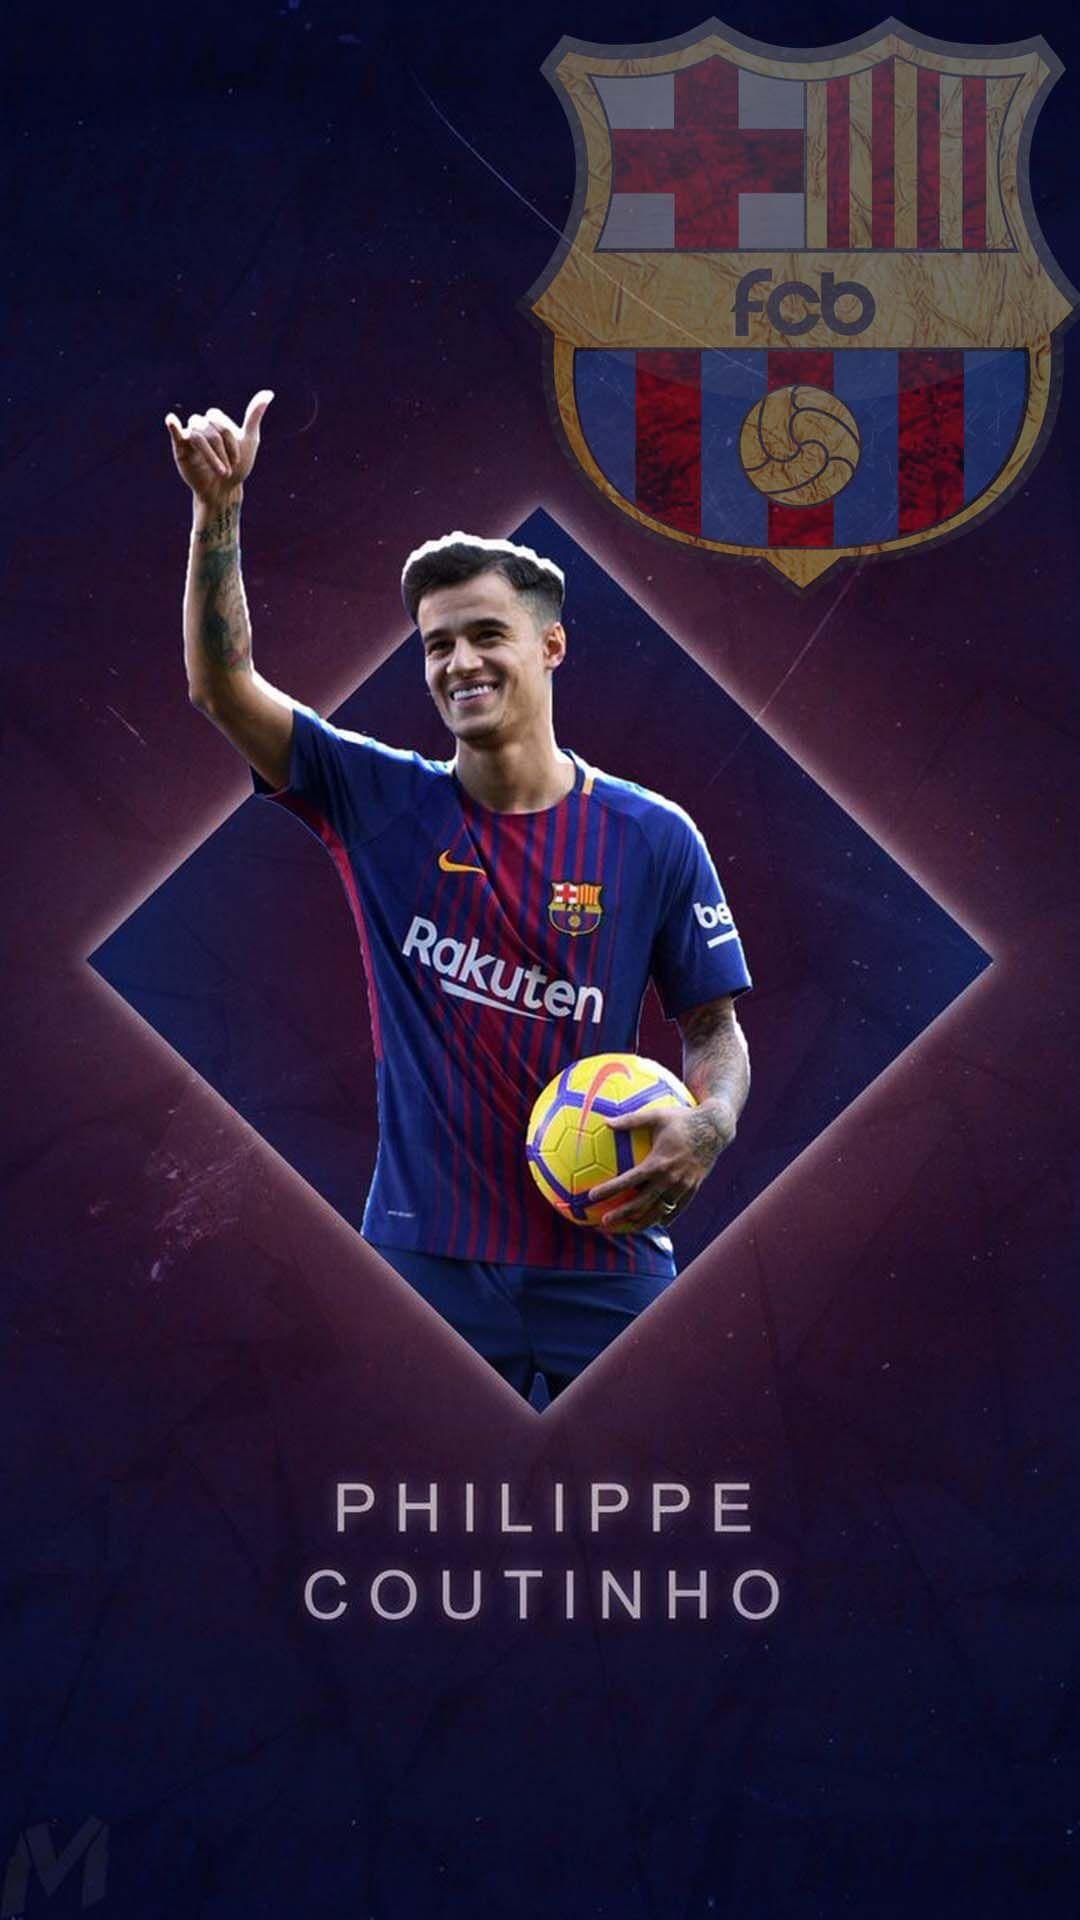 Coutinho Barcelona Wallpaper For Android. Android Wallpaper